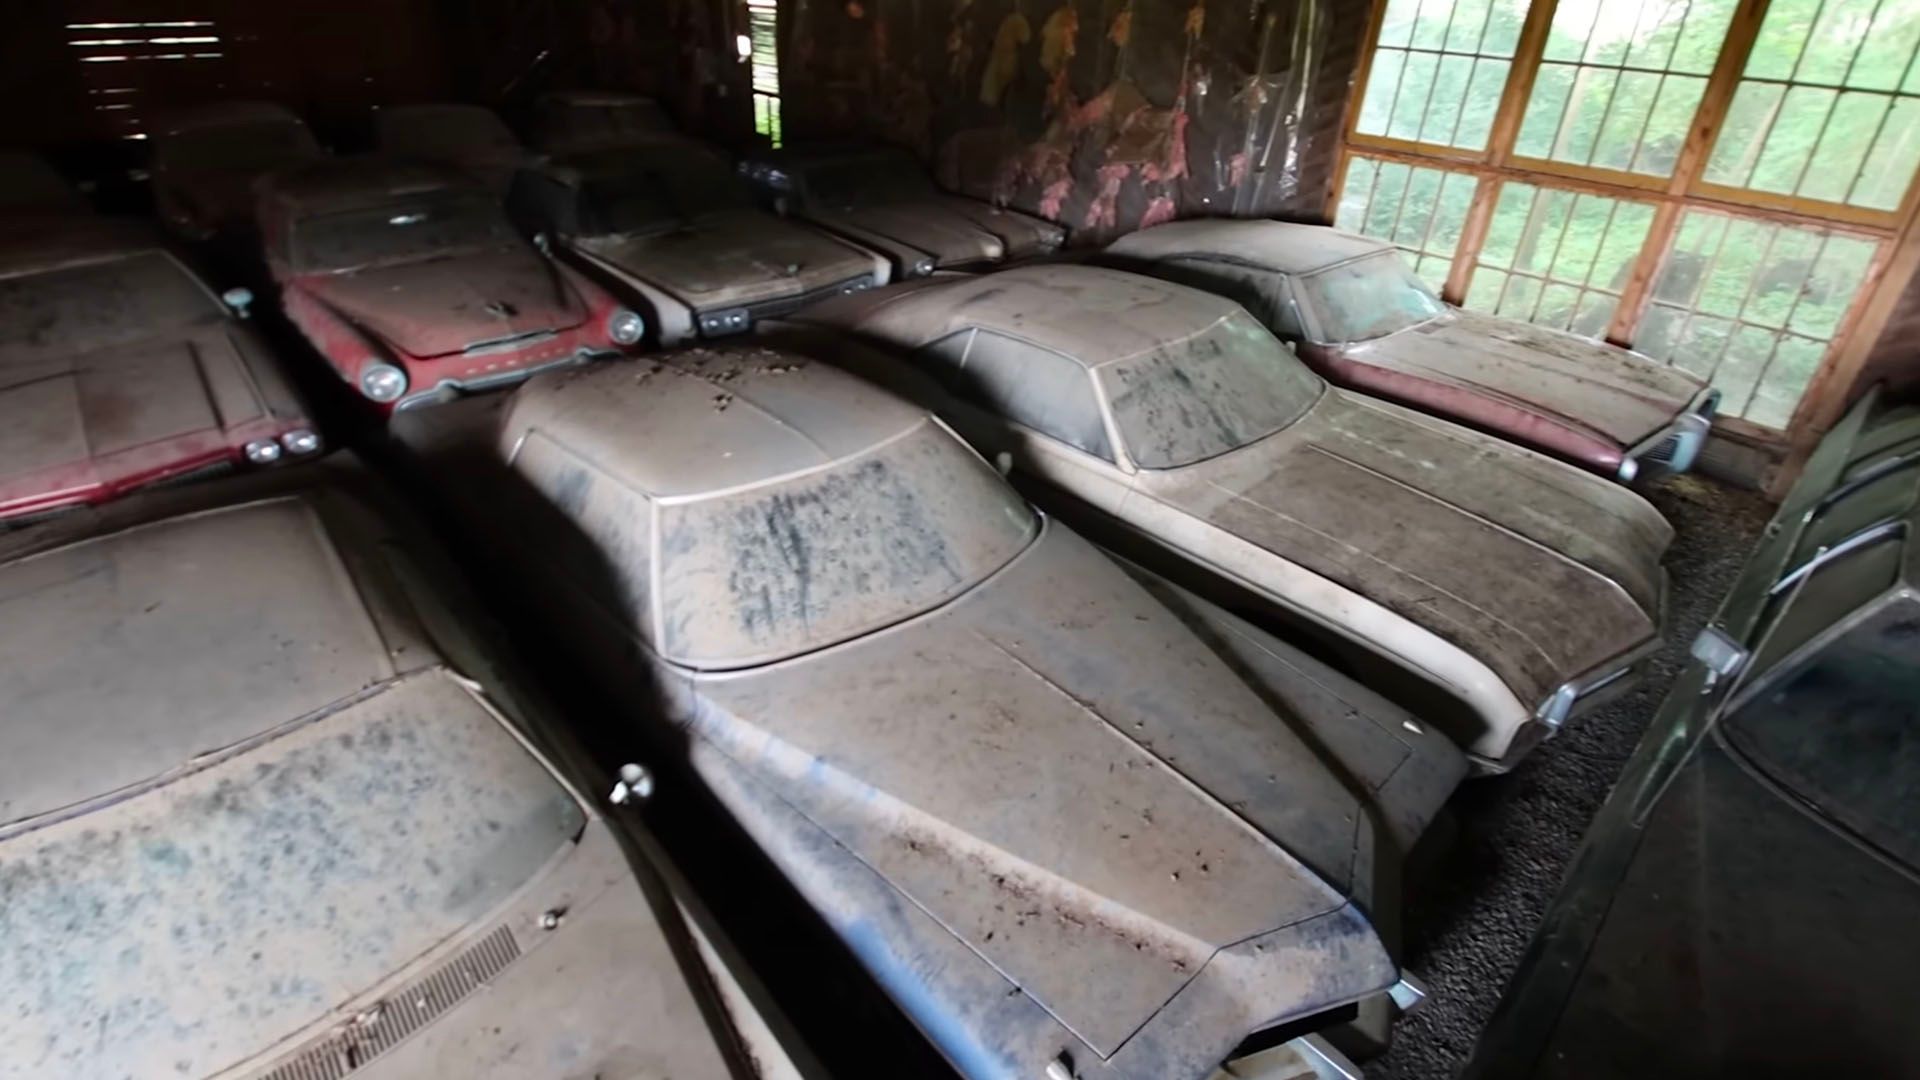 Iron Trap Garage find 50s, 60s classic cars in an abandoned airplane hangar